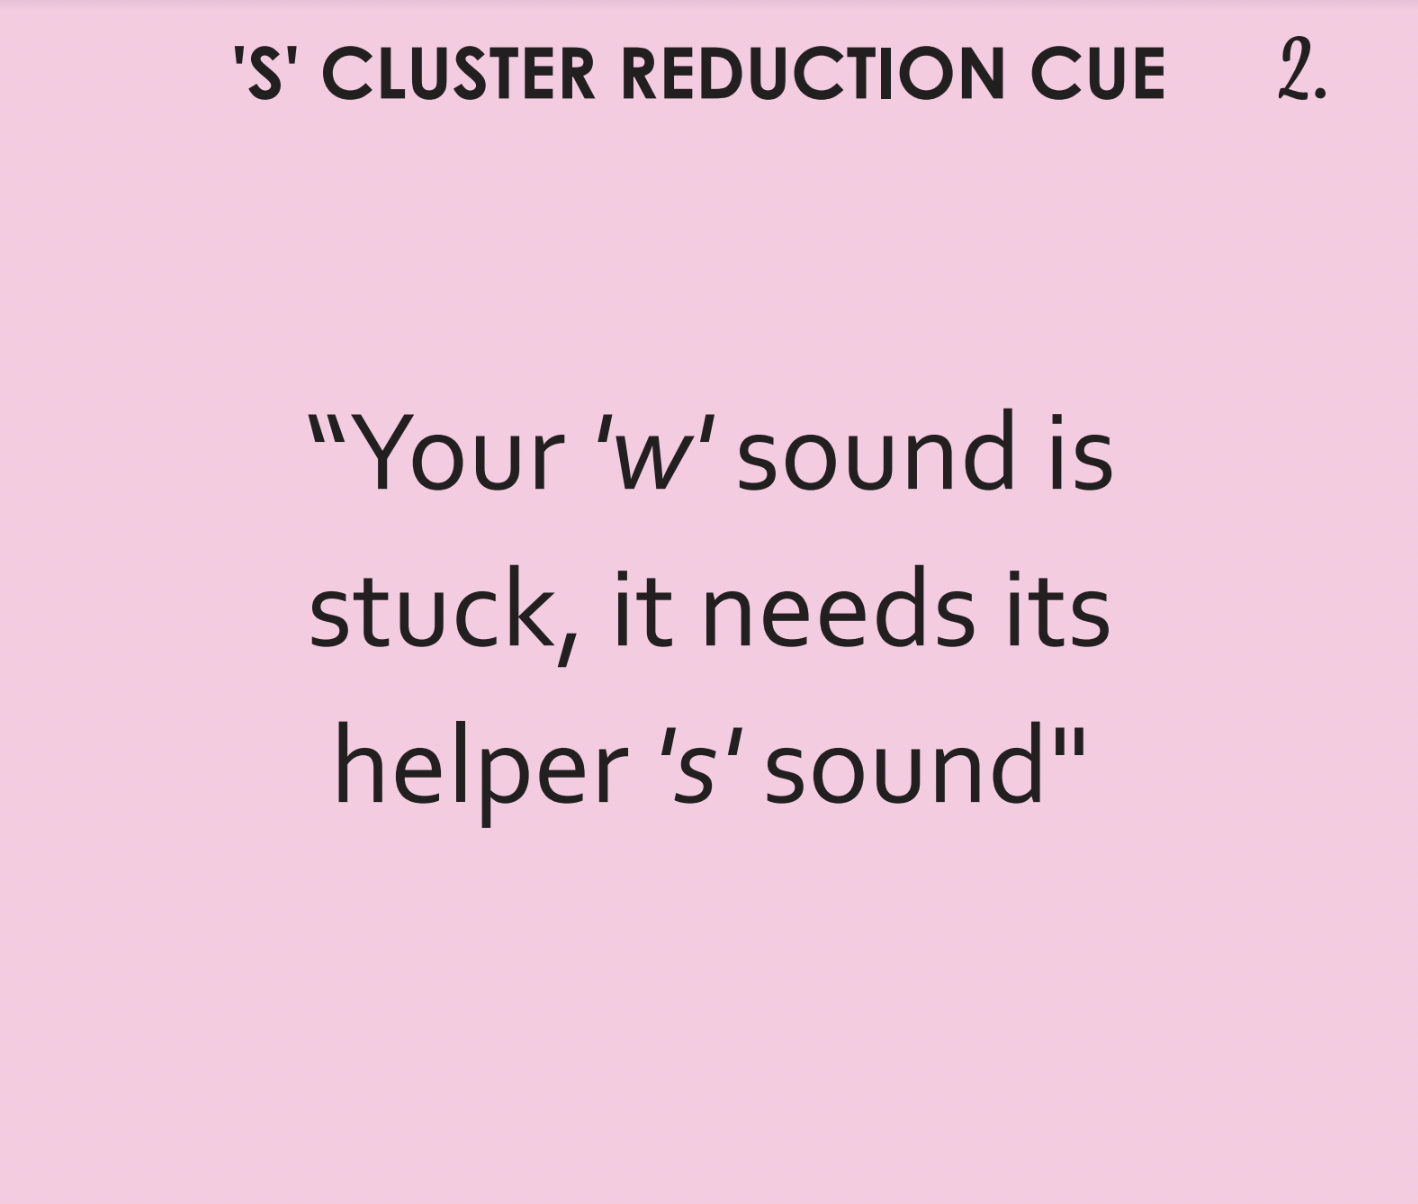 Minimal Pairs: S Cluster Reduction